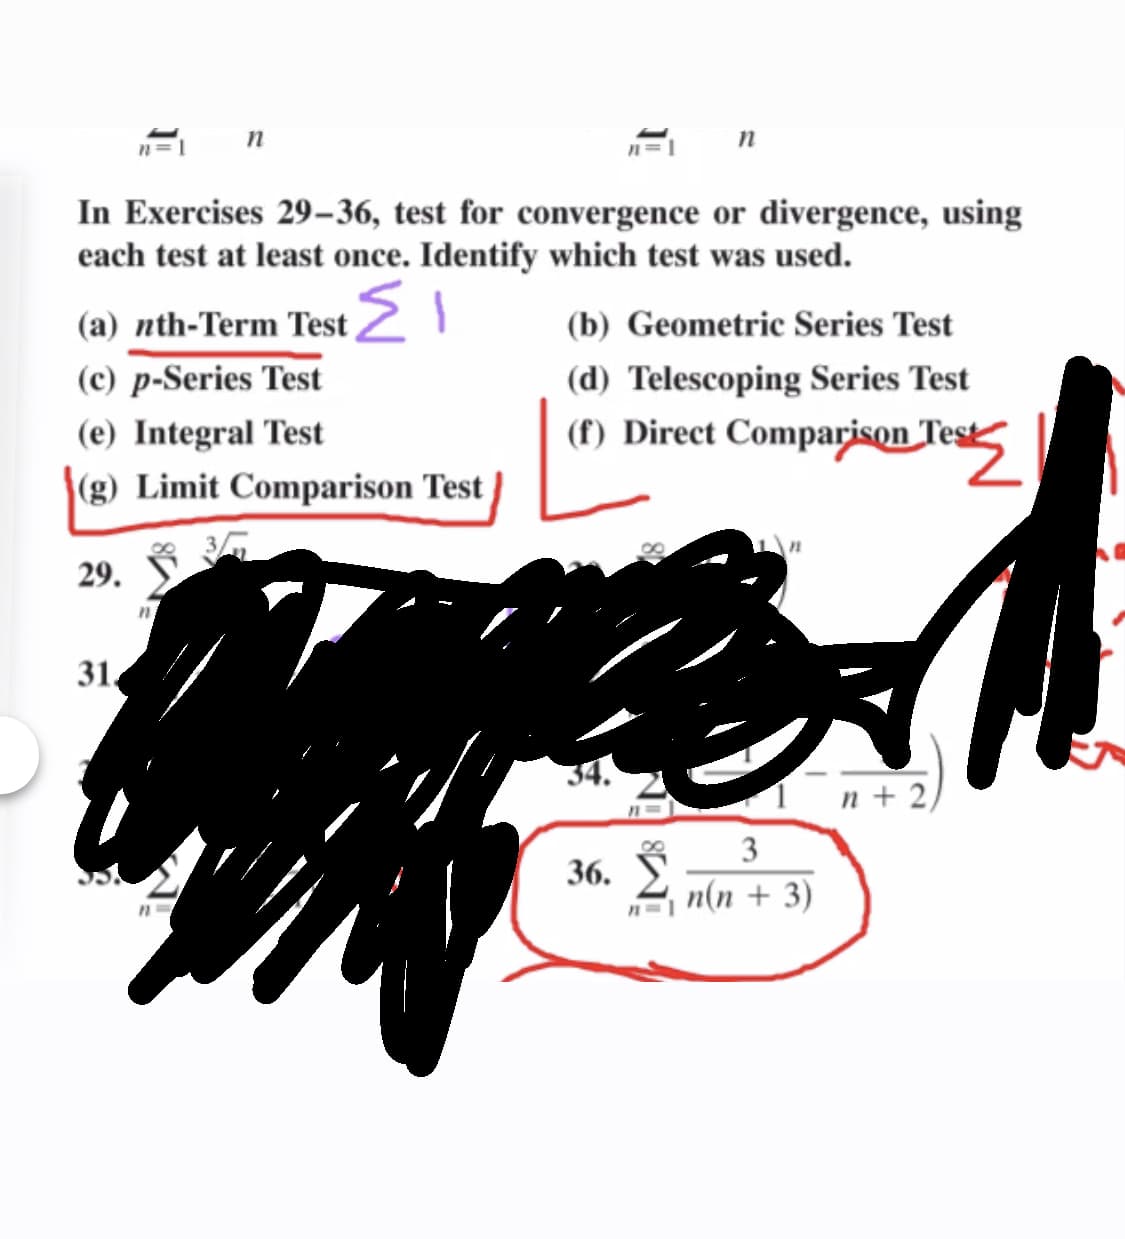 In Exercises 29–36, test for convergence or divergence, using
each test at least once. Identify which test was used.
(a) nth-Term Test 2 I
(c) p-Series Test
(b) Geometric Series Test
(d) Telescoping Series Test
(e) Integral Test
(f) Direct Comparison Test
(g) Limit Comparison Test
29.
31.
n + 2
3
36.
2 n(n + 3)
